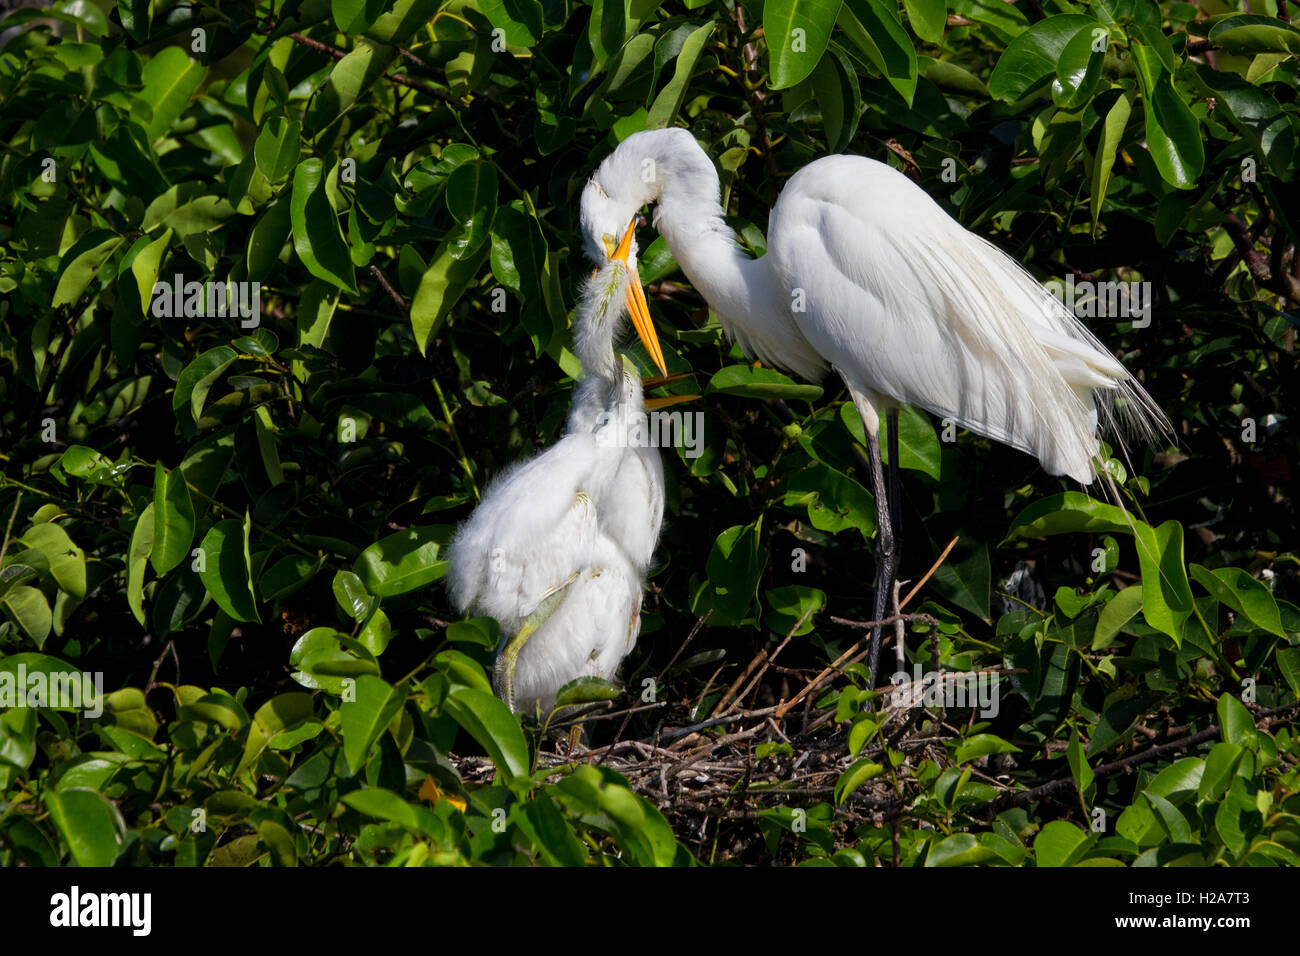 Hungry White Egret chicks have learned where the food comes from and grasp their parent's bill to be fed. Stock Photo